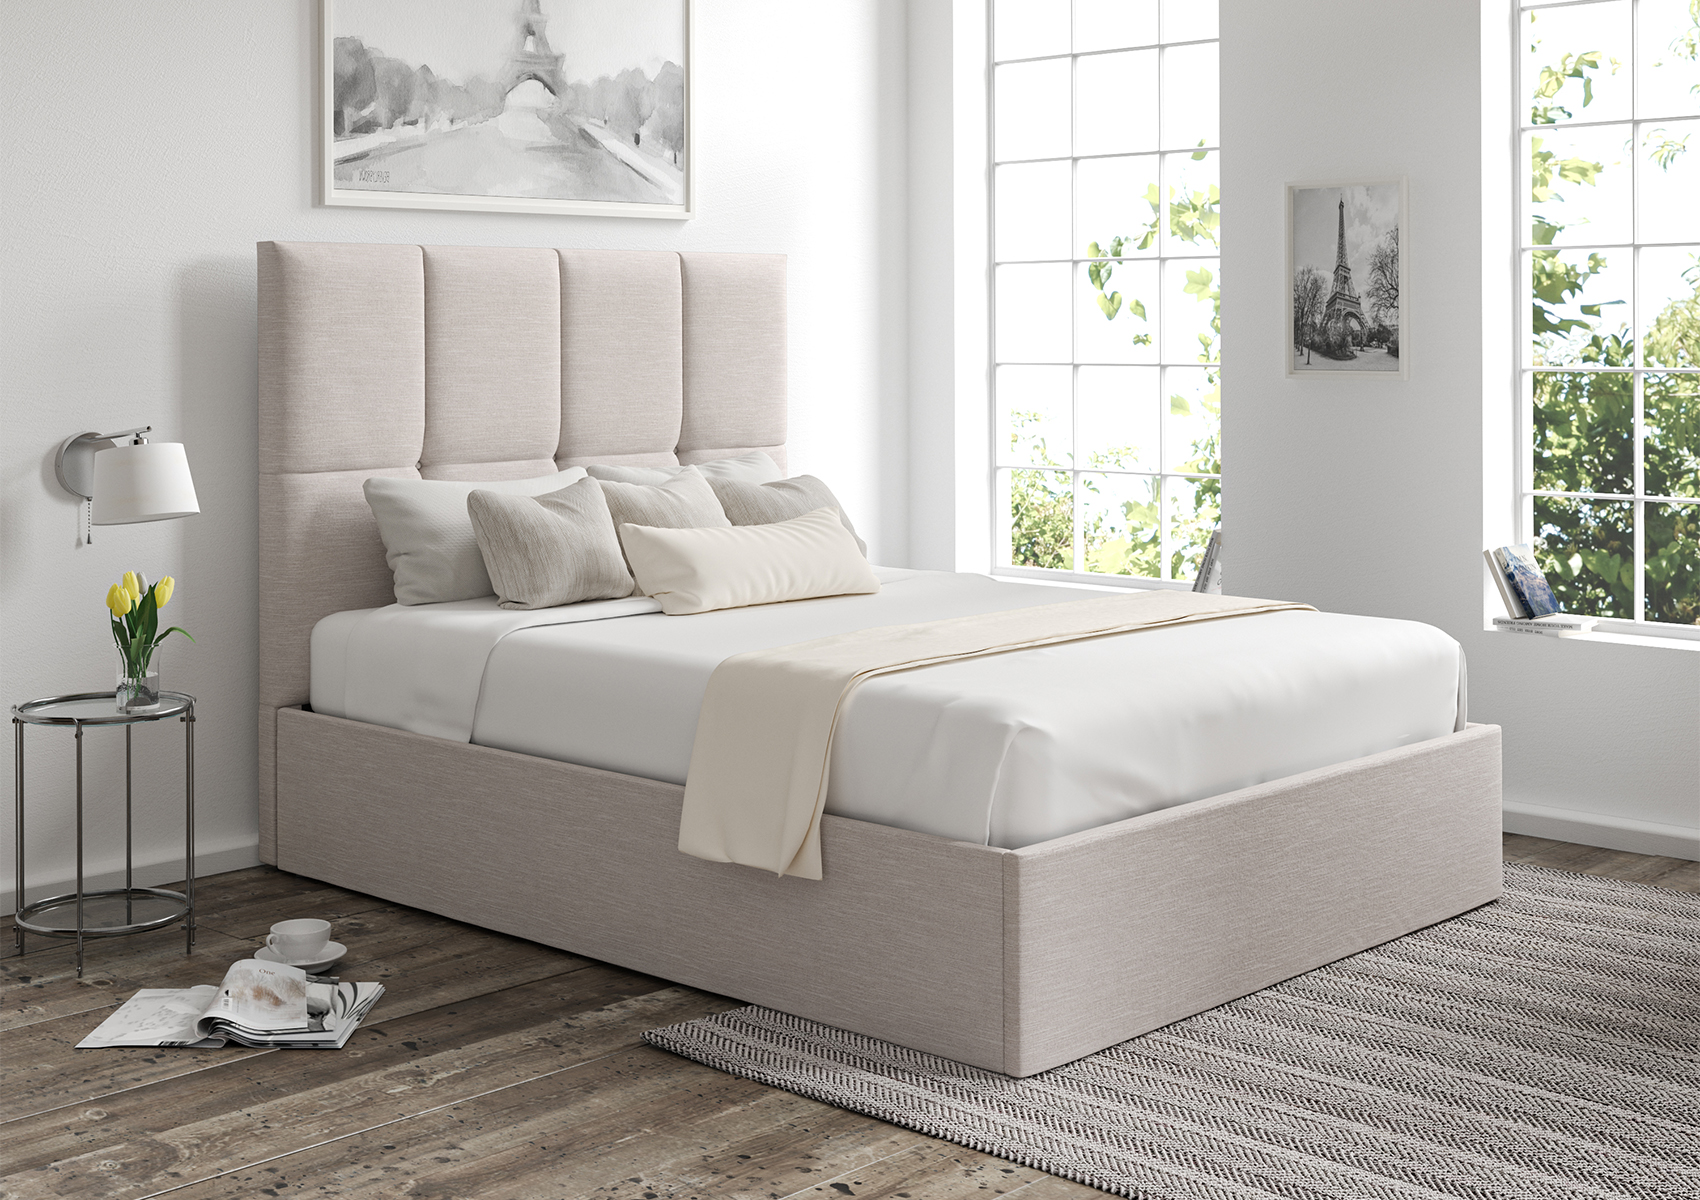 View Turin Linea Fog Upholstered Ottoman Bed Frame Only Time4Sleep information